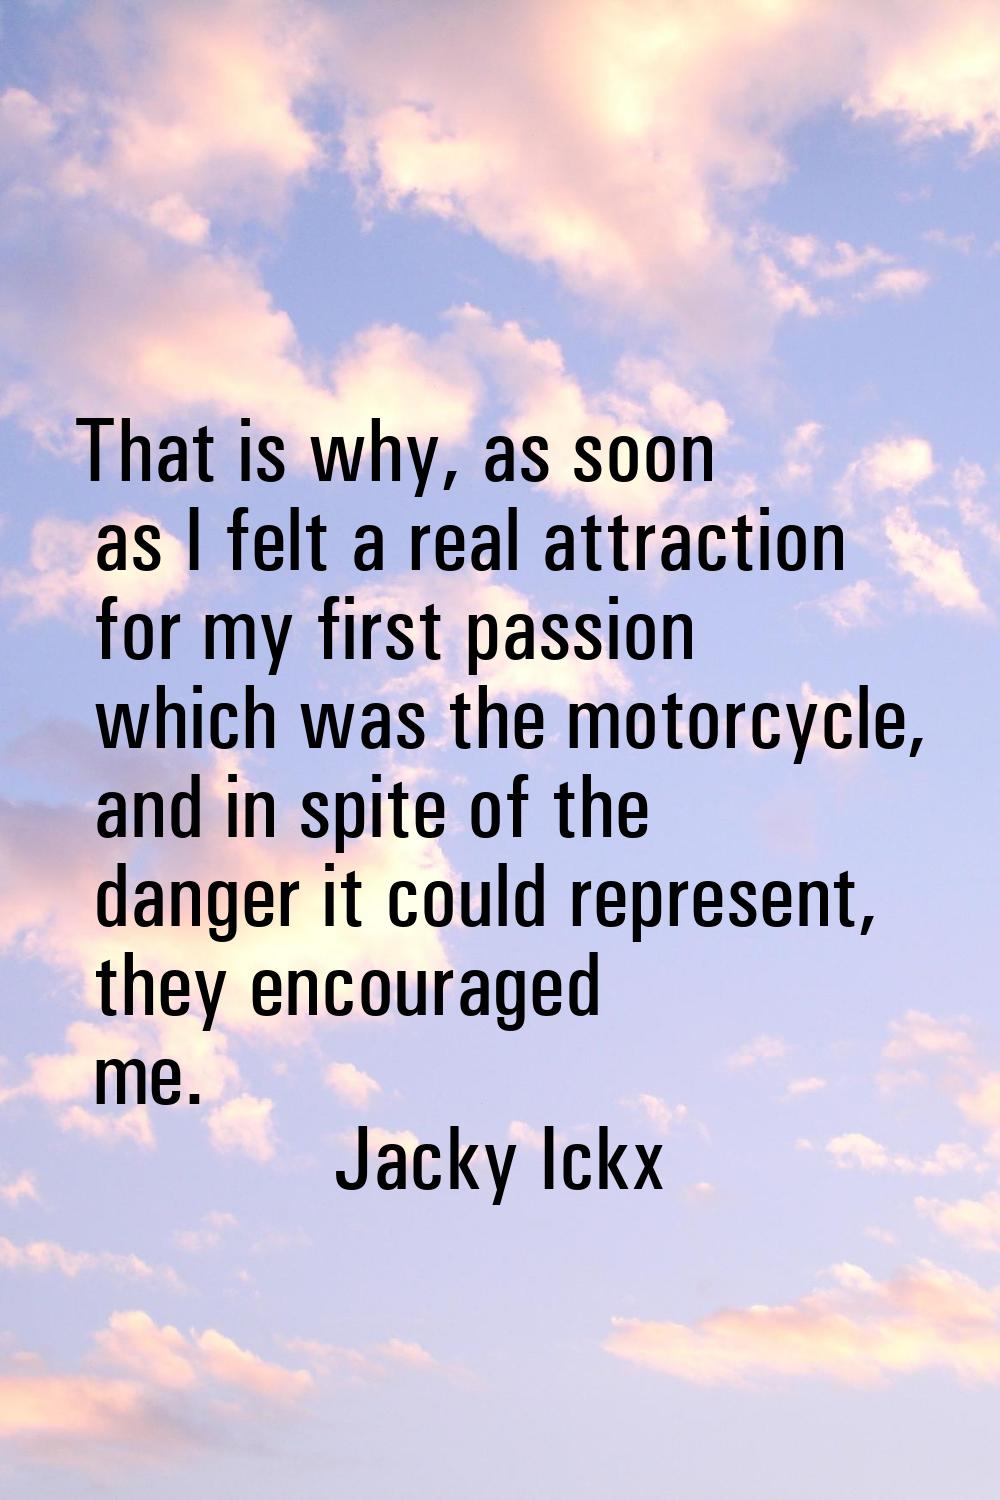 That is why, as soon as I felt a real attraction for my first passion which was the motorcycle, and